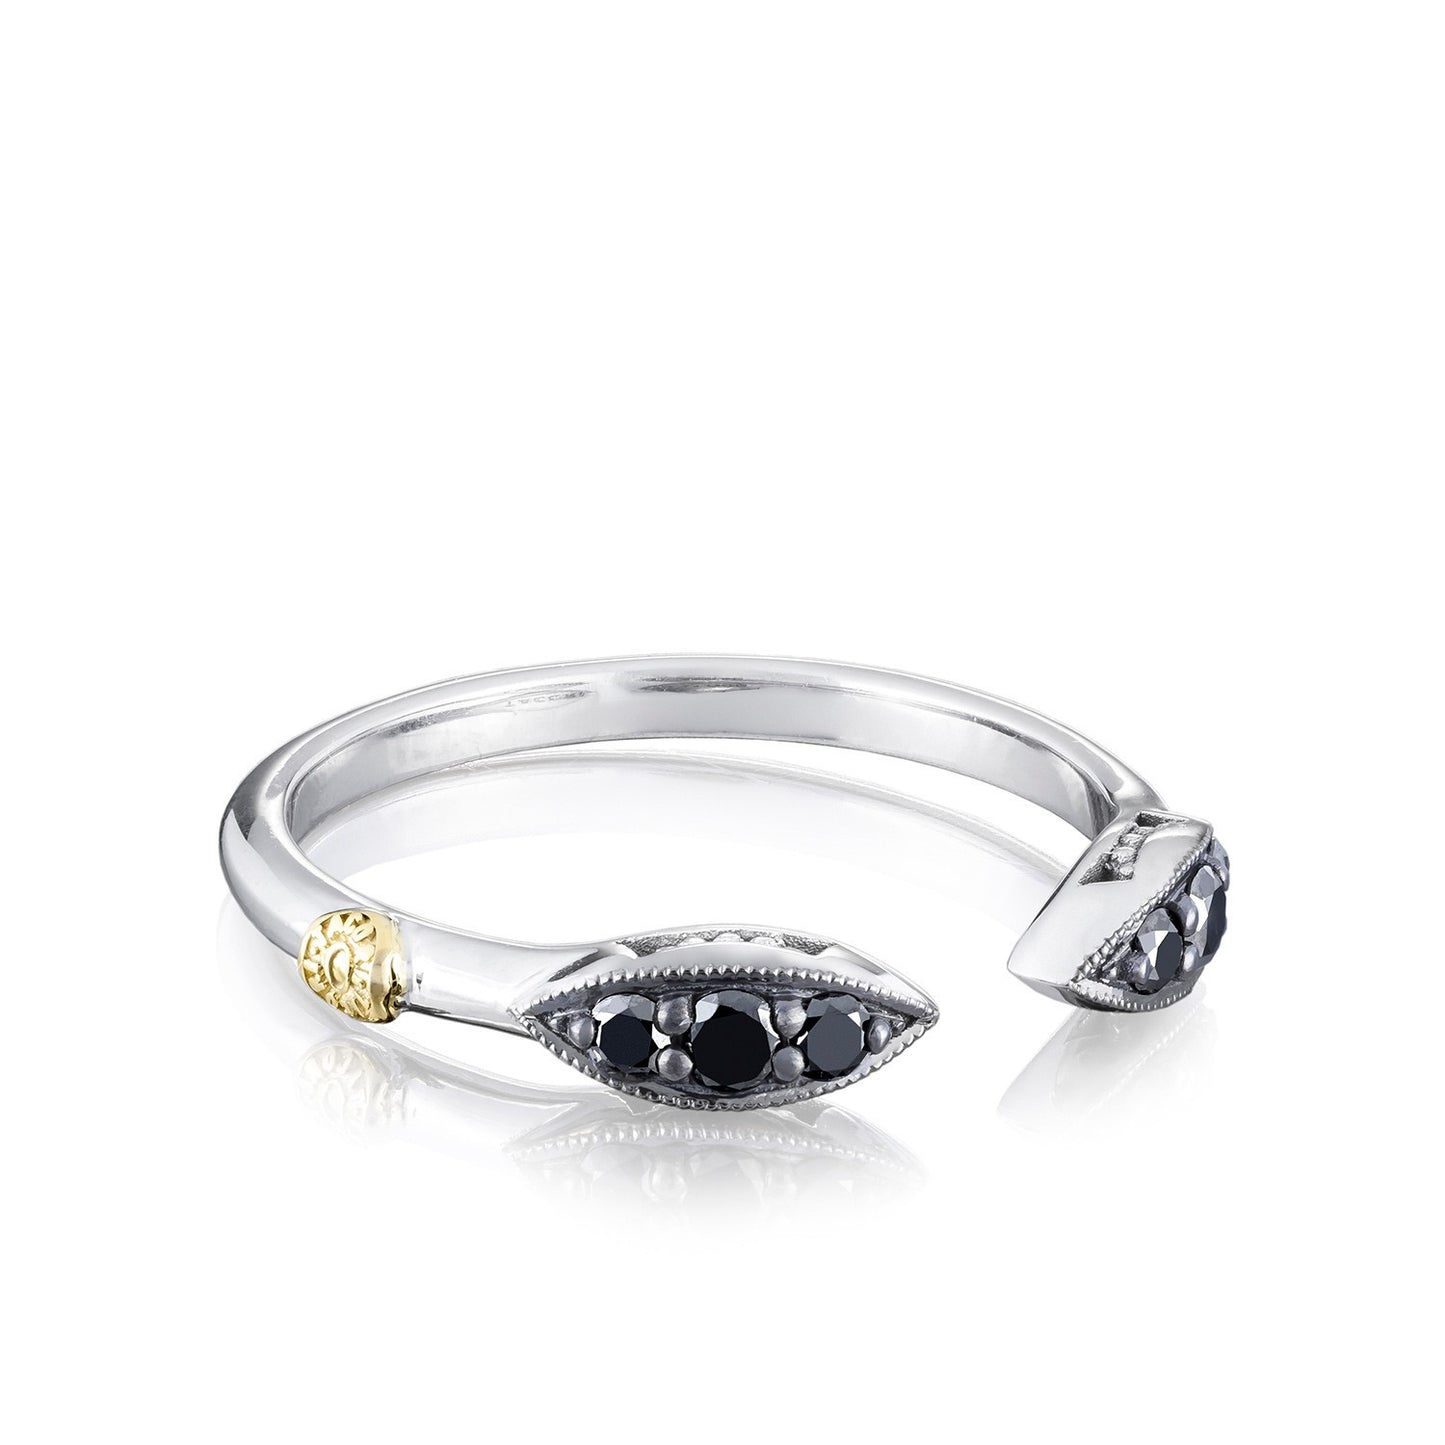 Ivy Lane Pave Surfboard Ring featuring Black Diamonds Style #SR20044